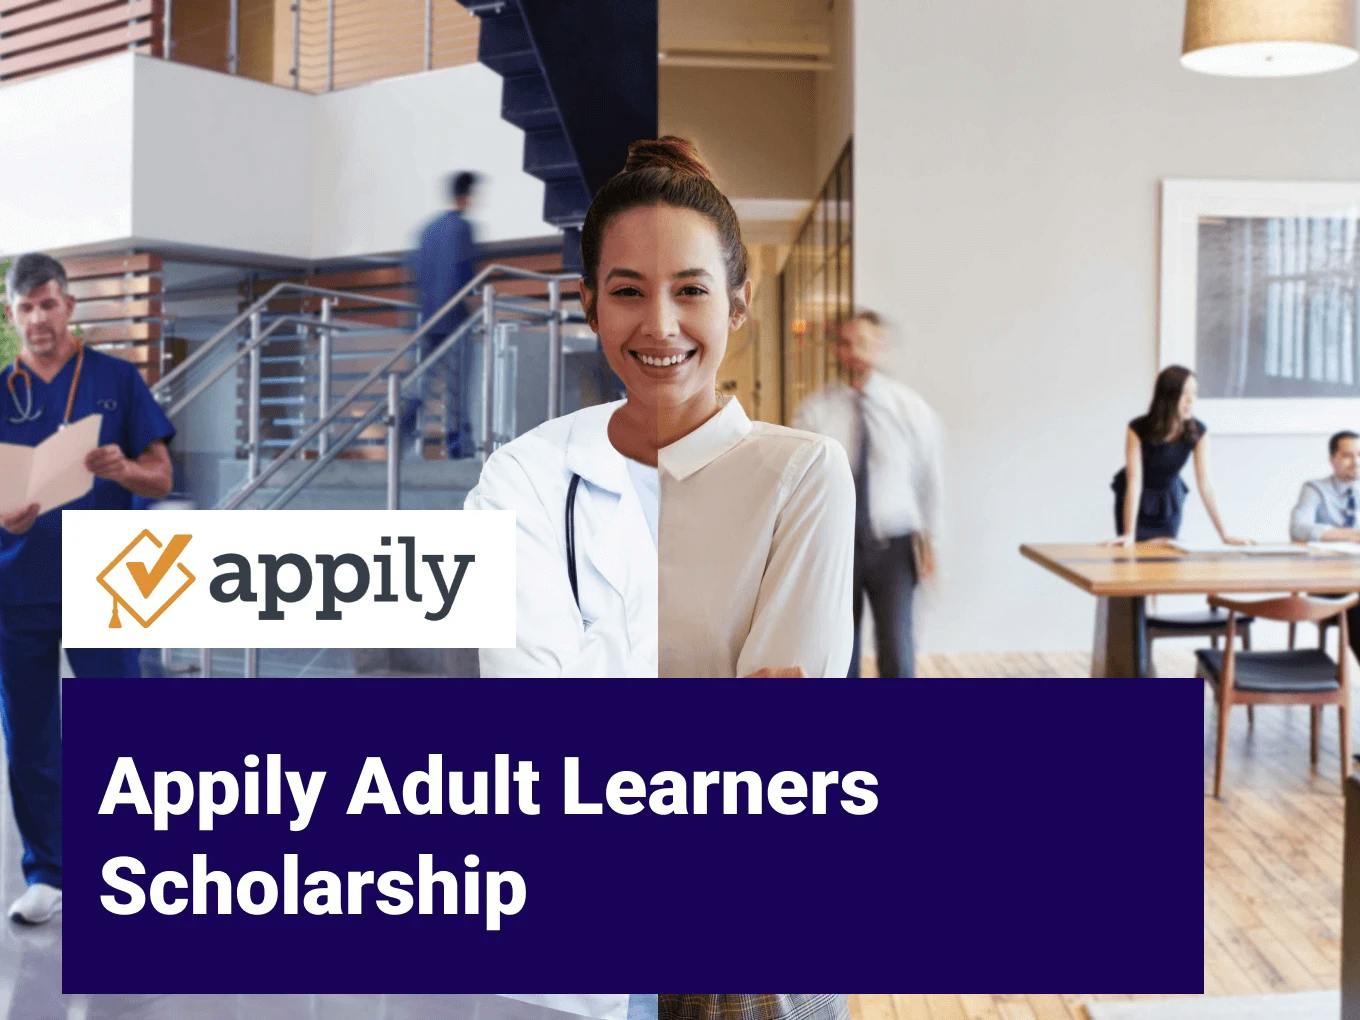 Appily Adult Learners Scholarship